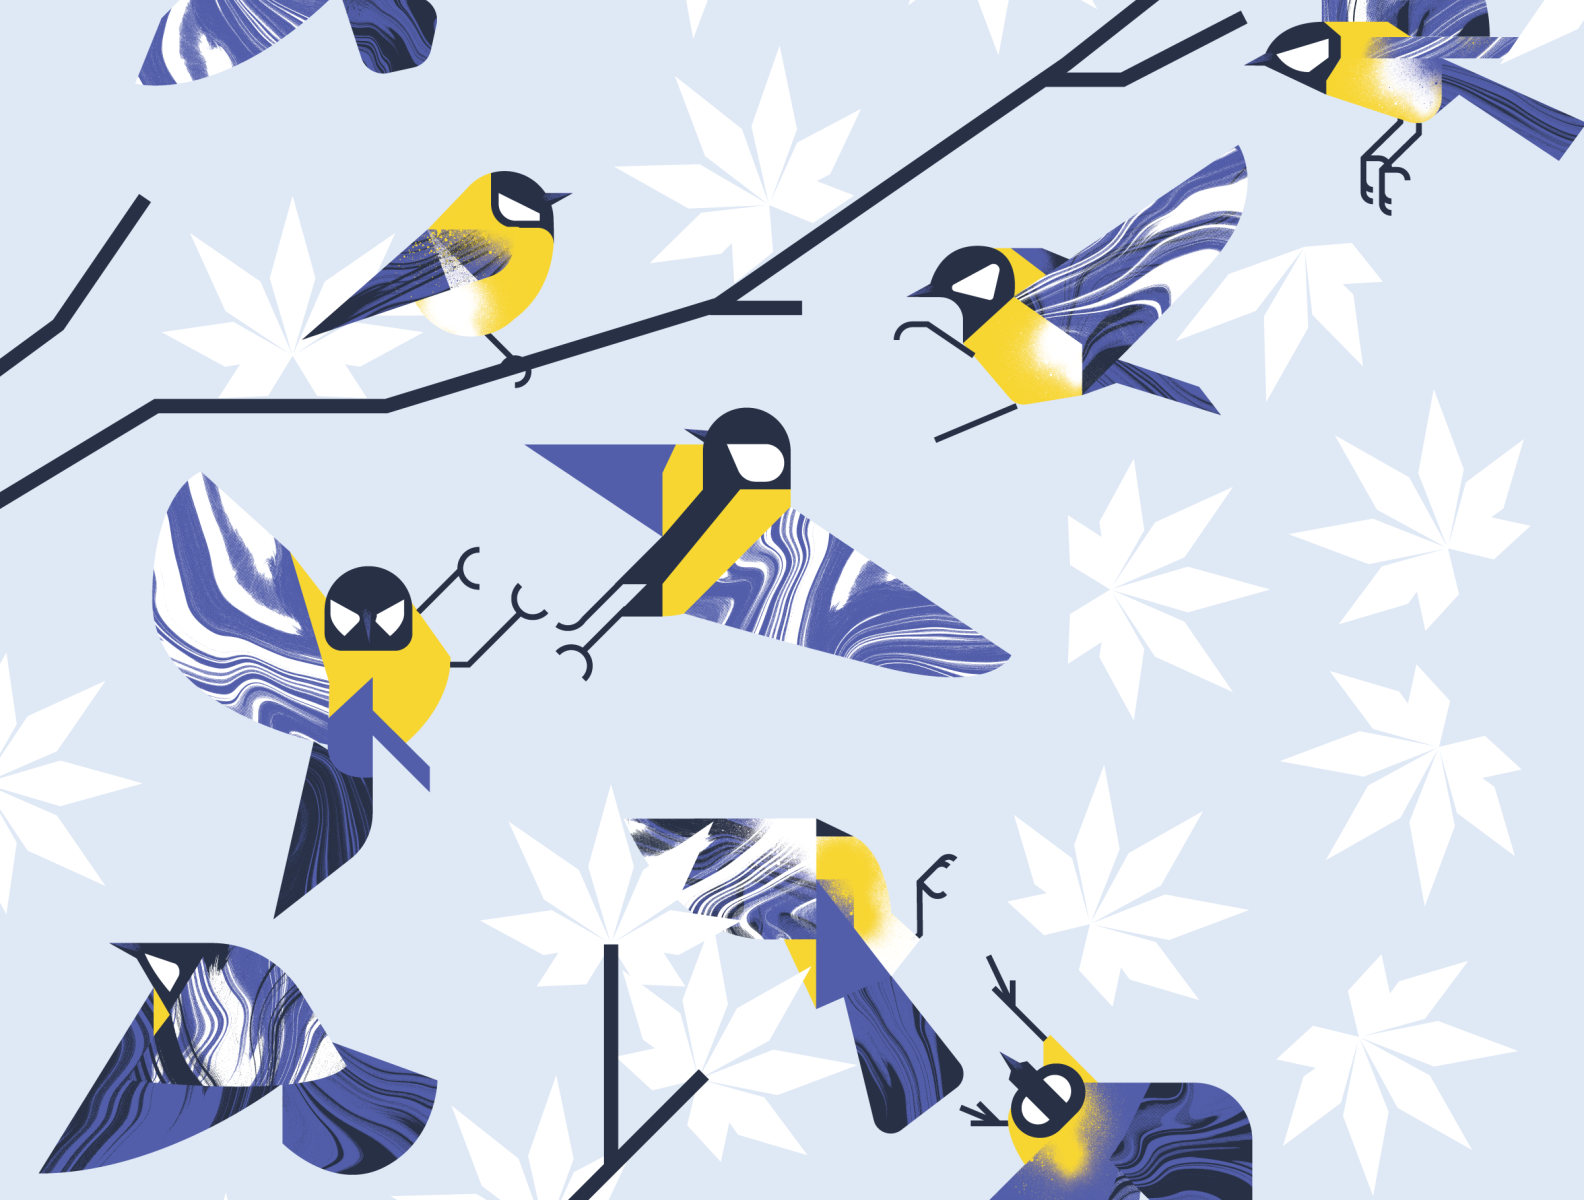 Finches sparring in Winter by Lane Kinkade on Dribbble